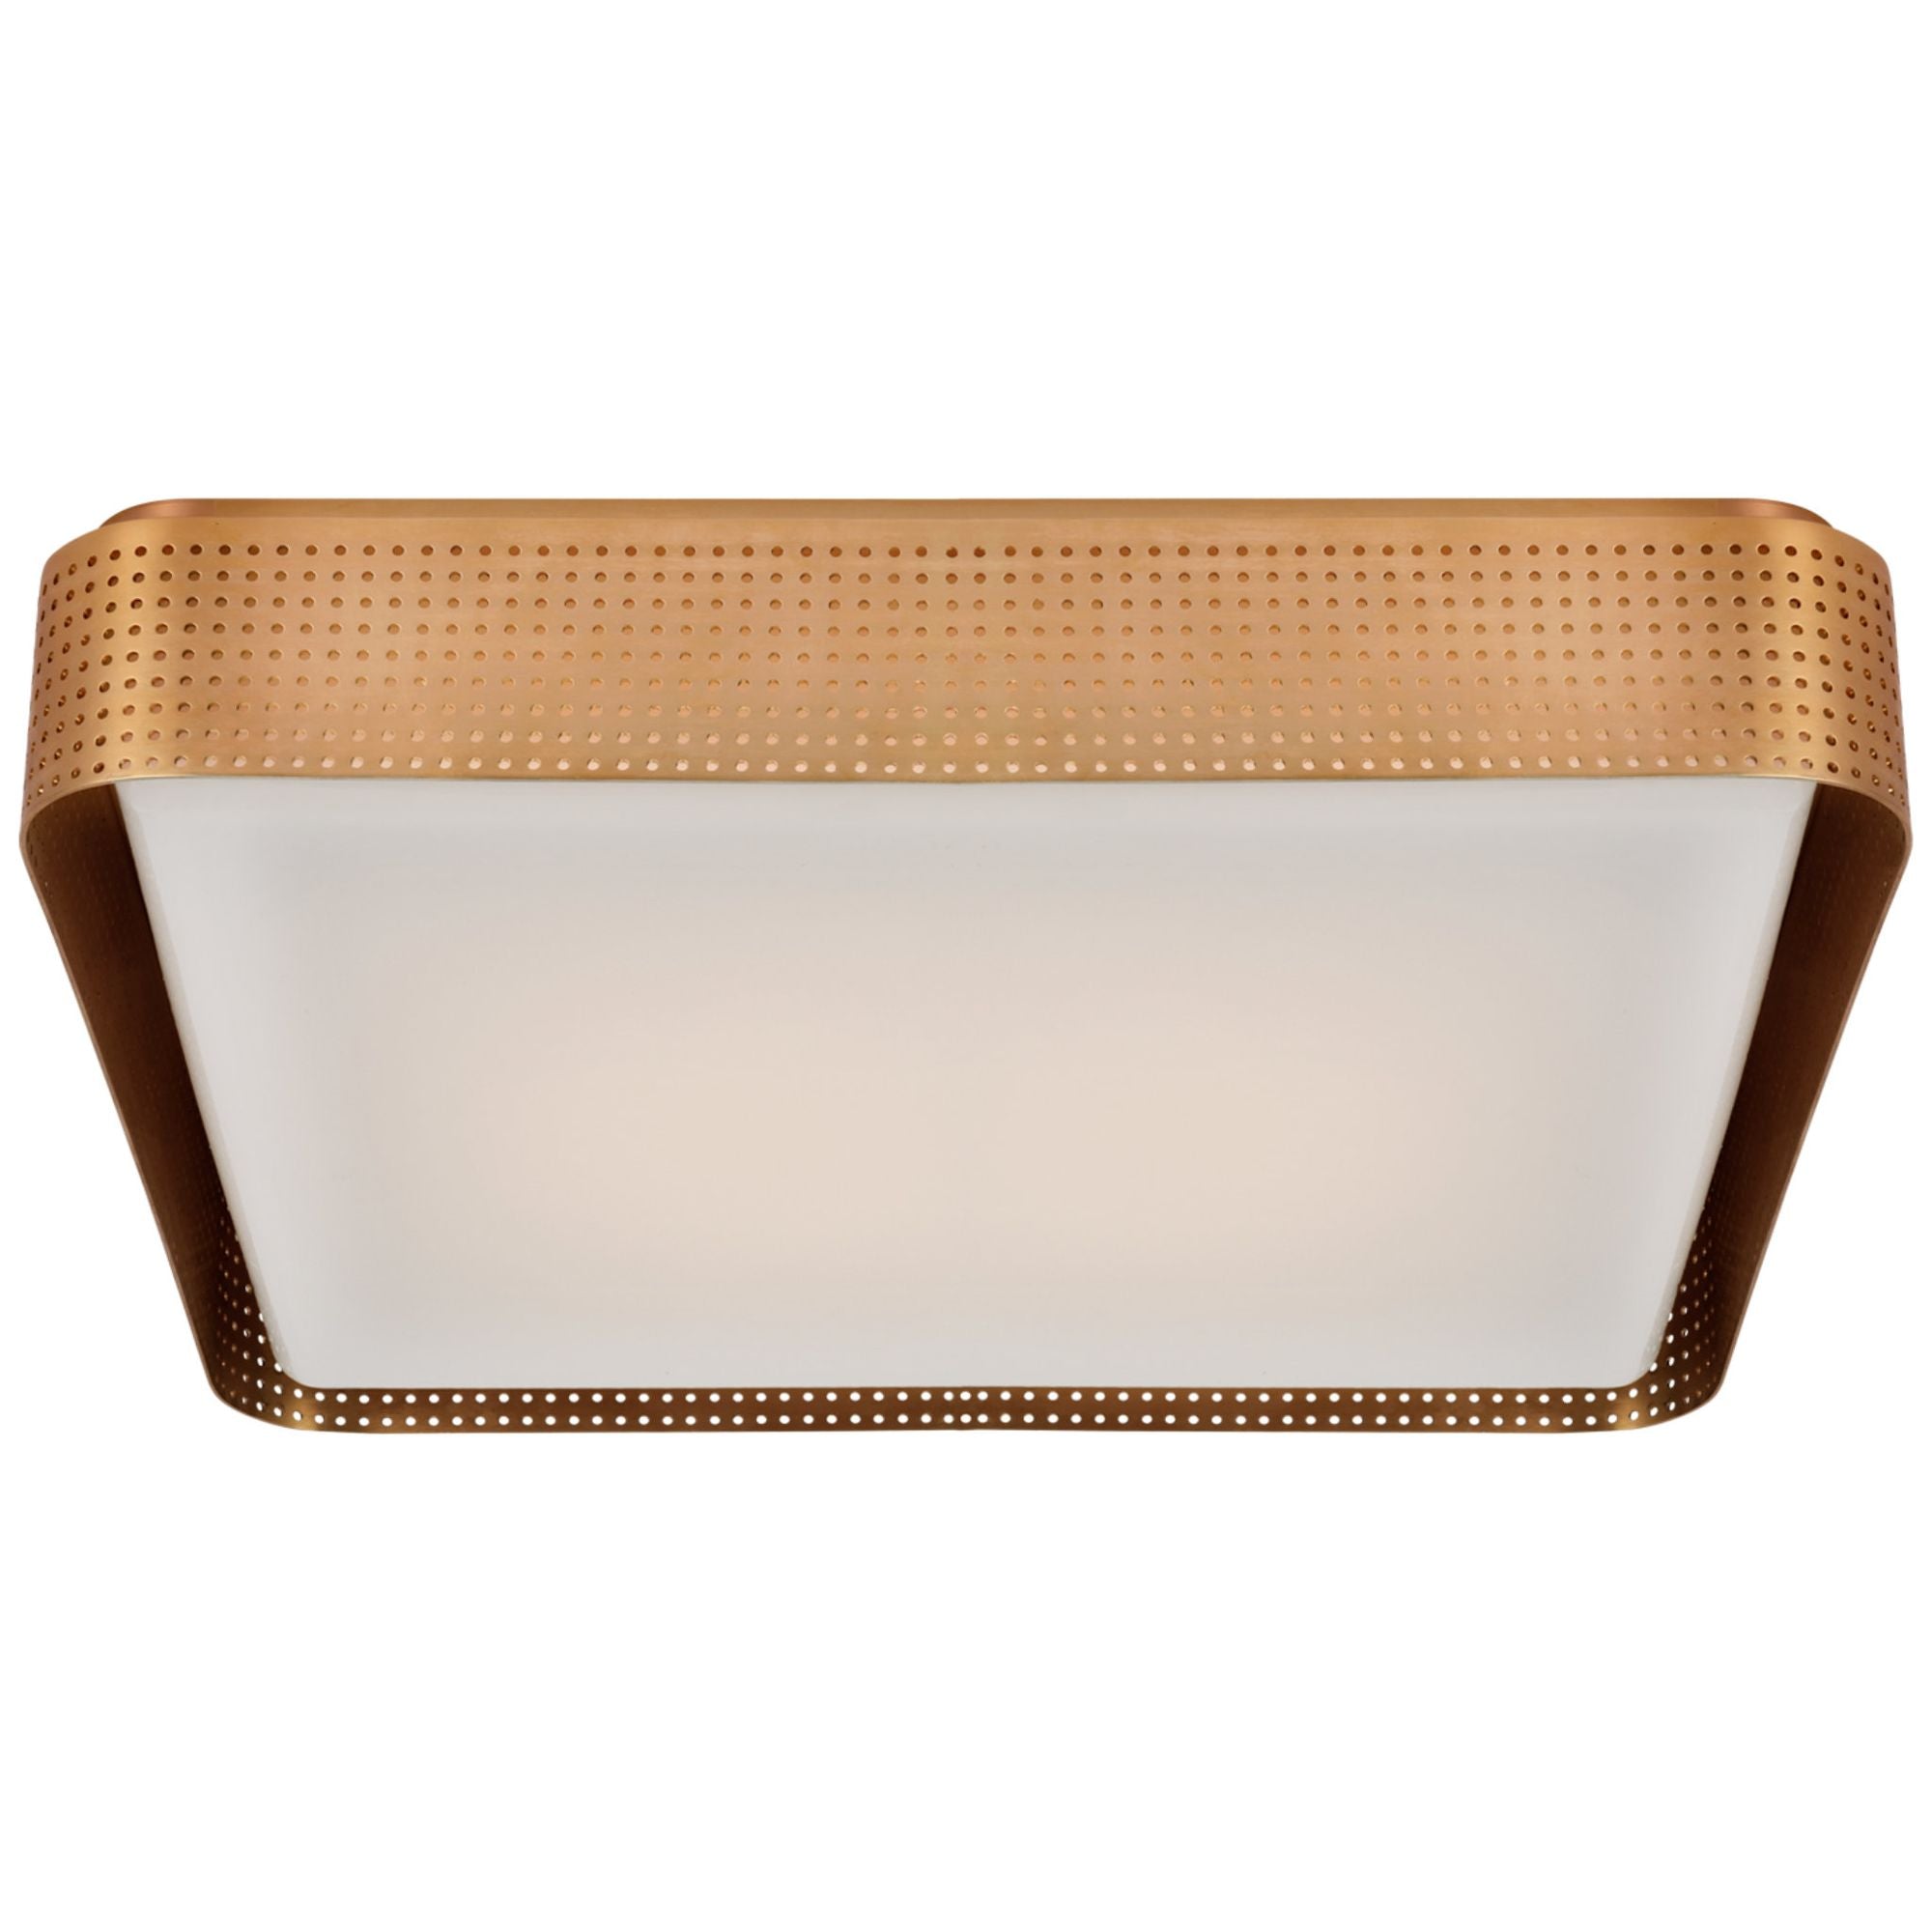 Kelly Wearstler Precision 20" Square Flush Mount in Antique-Burnished Brass with White Glass